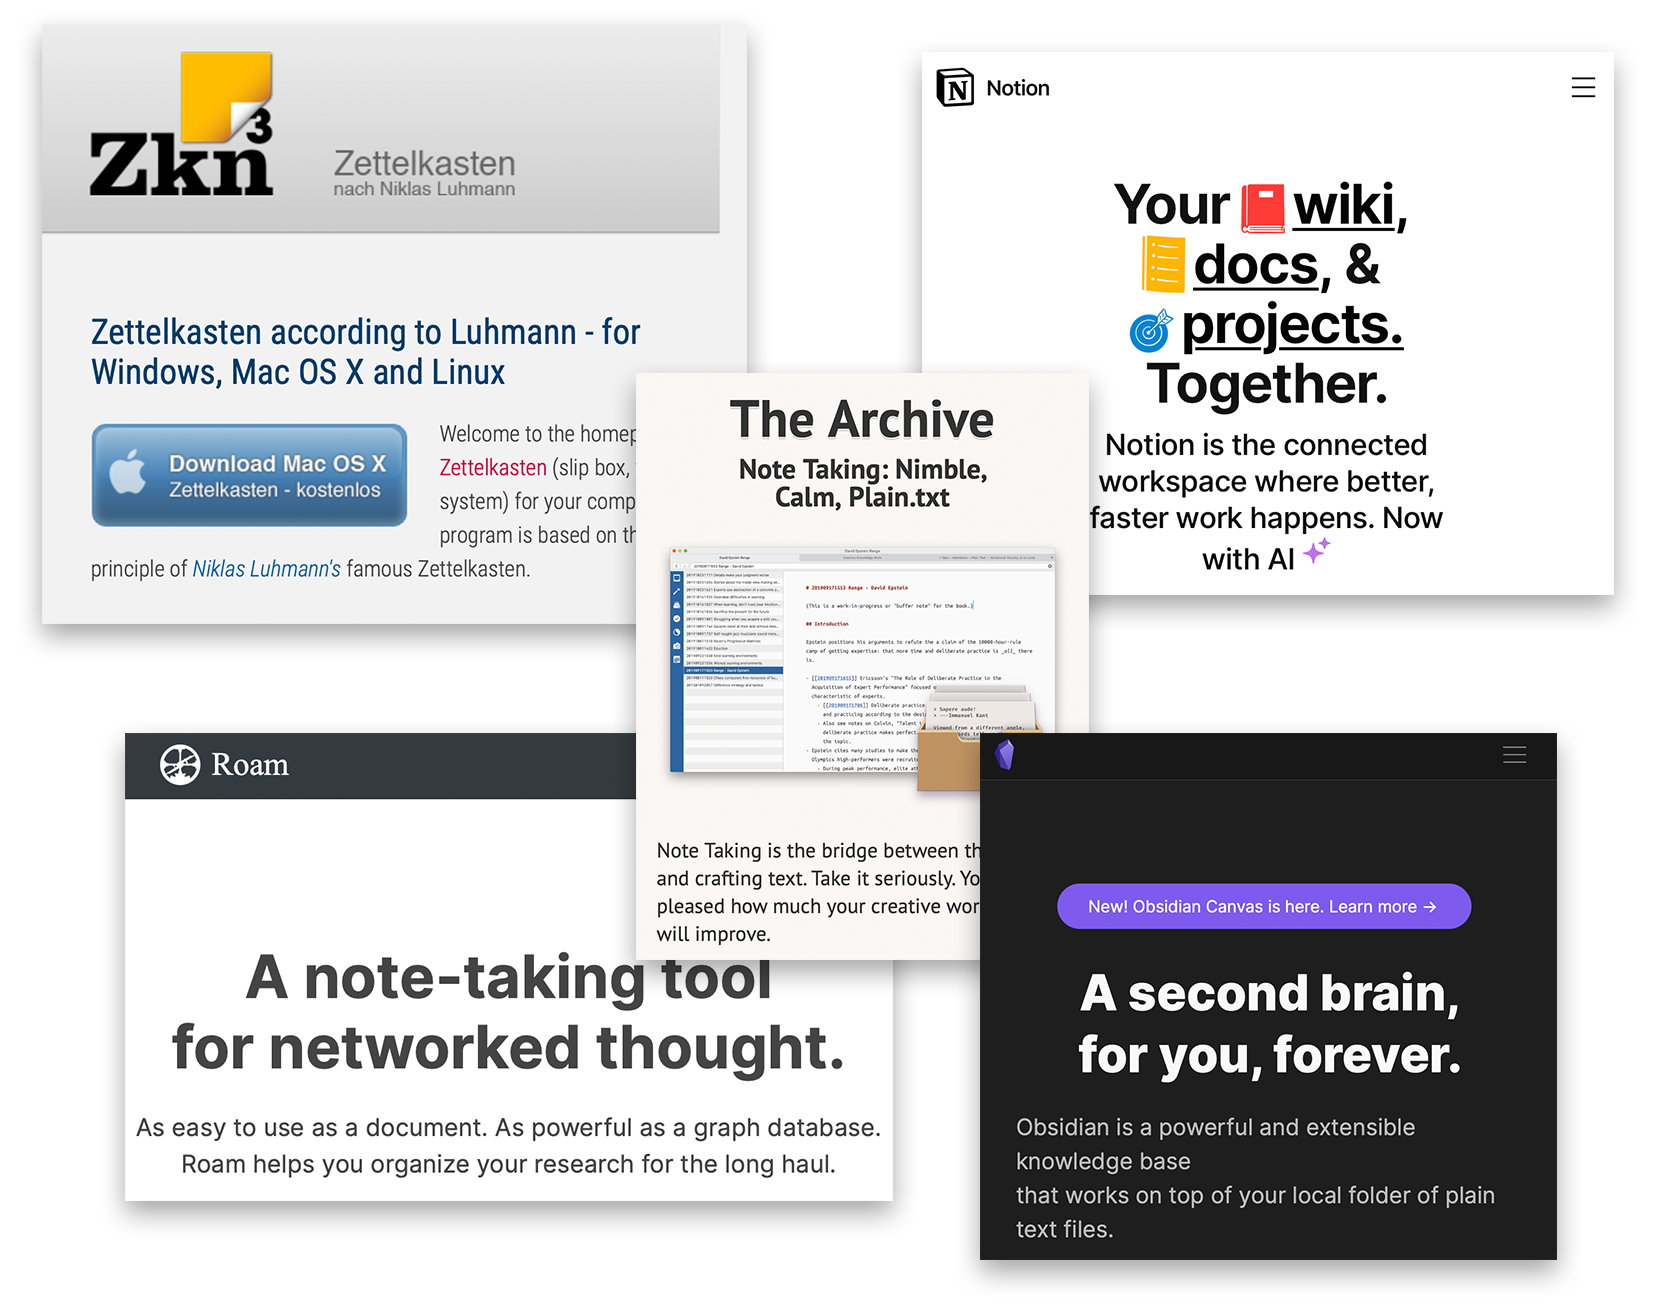 Five examples of networked note-taking software, include Zettelkasten, Notion, The Archive, Obsidian, and Roam.